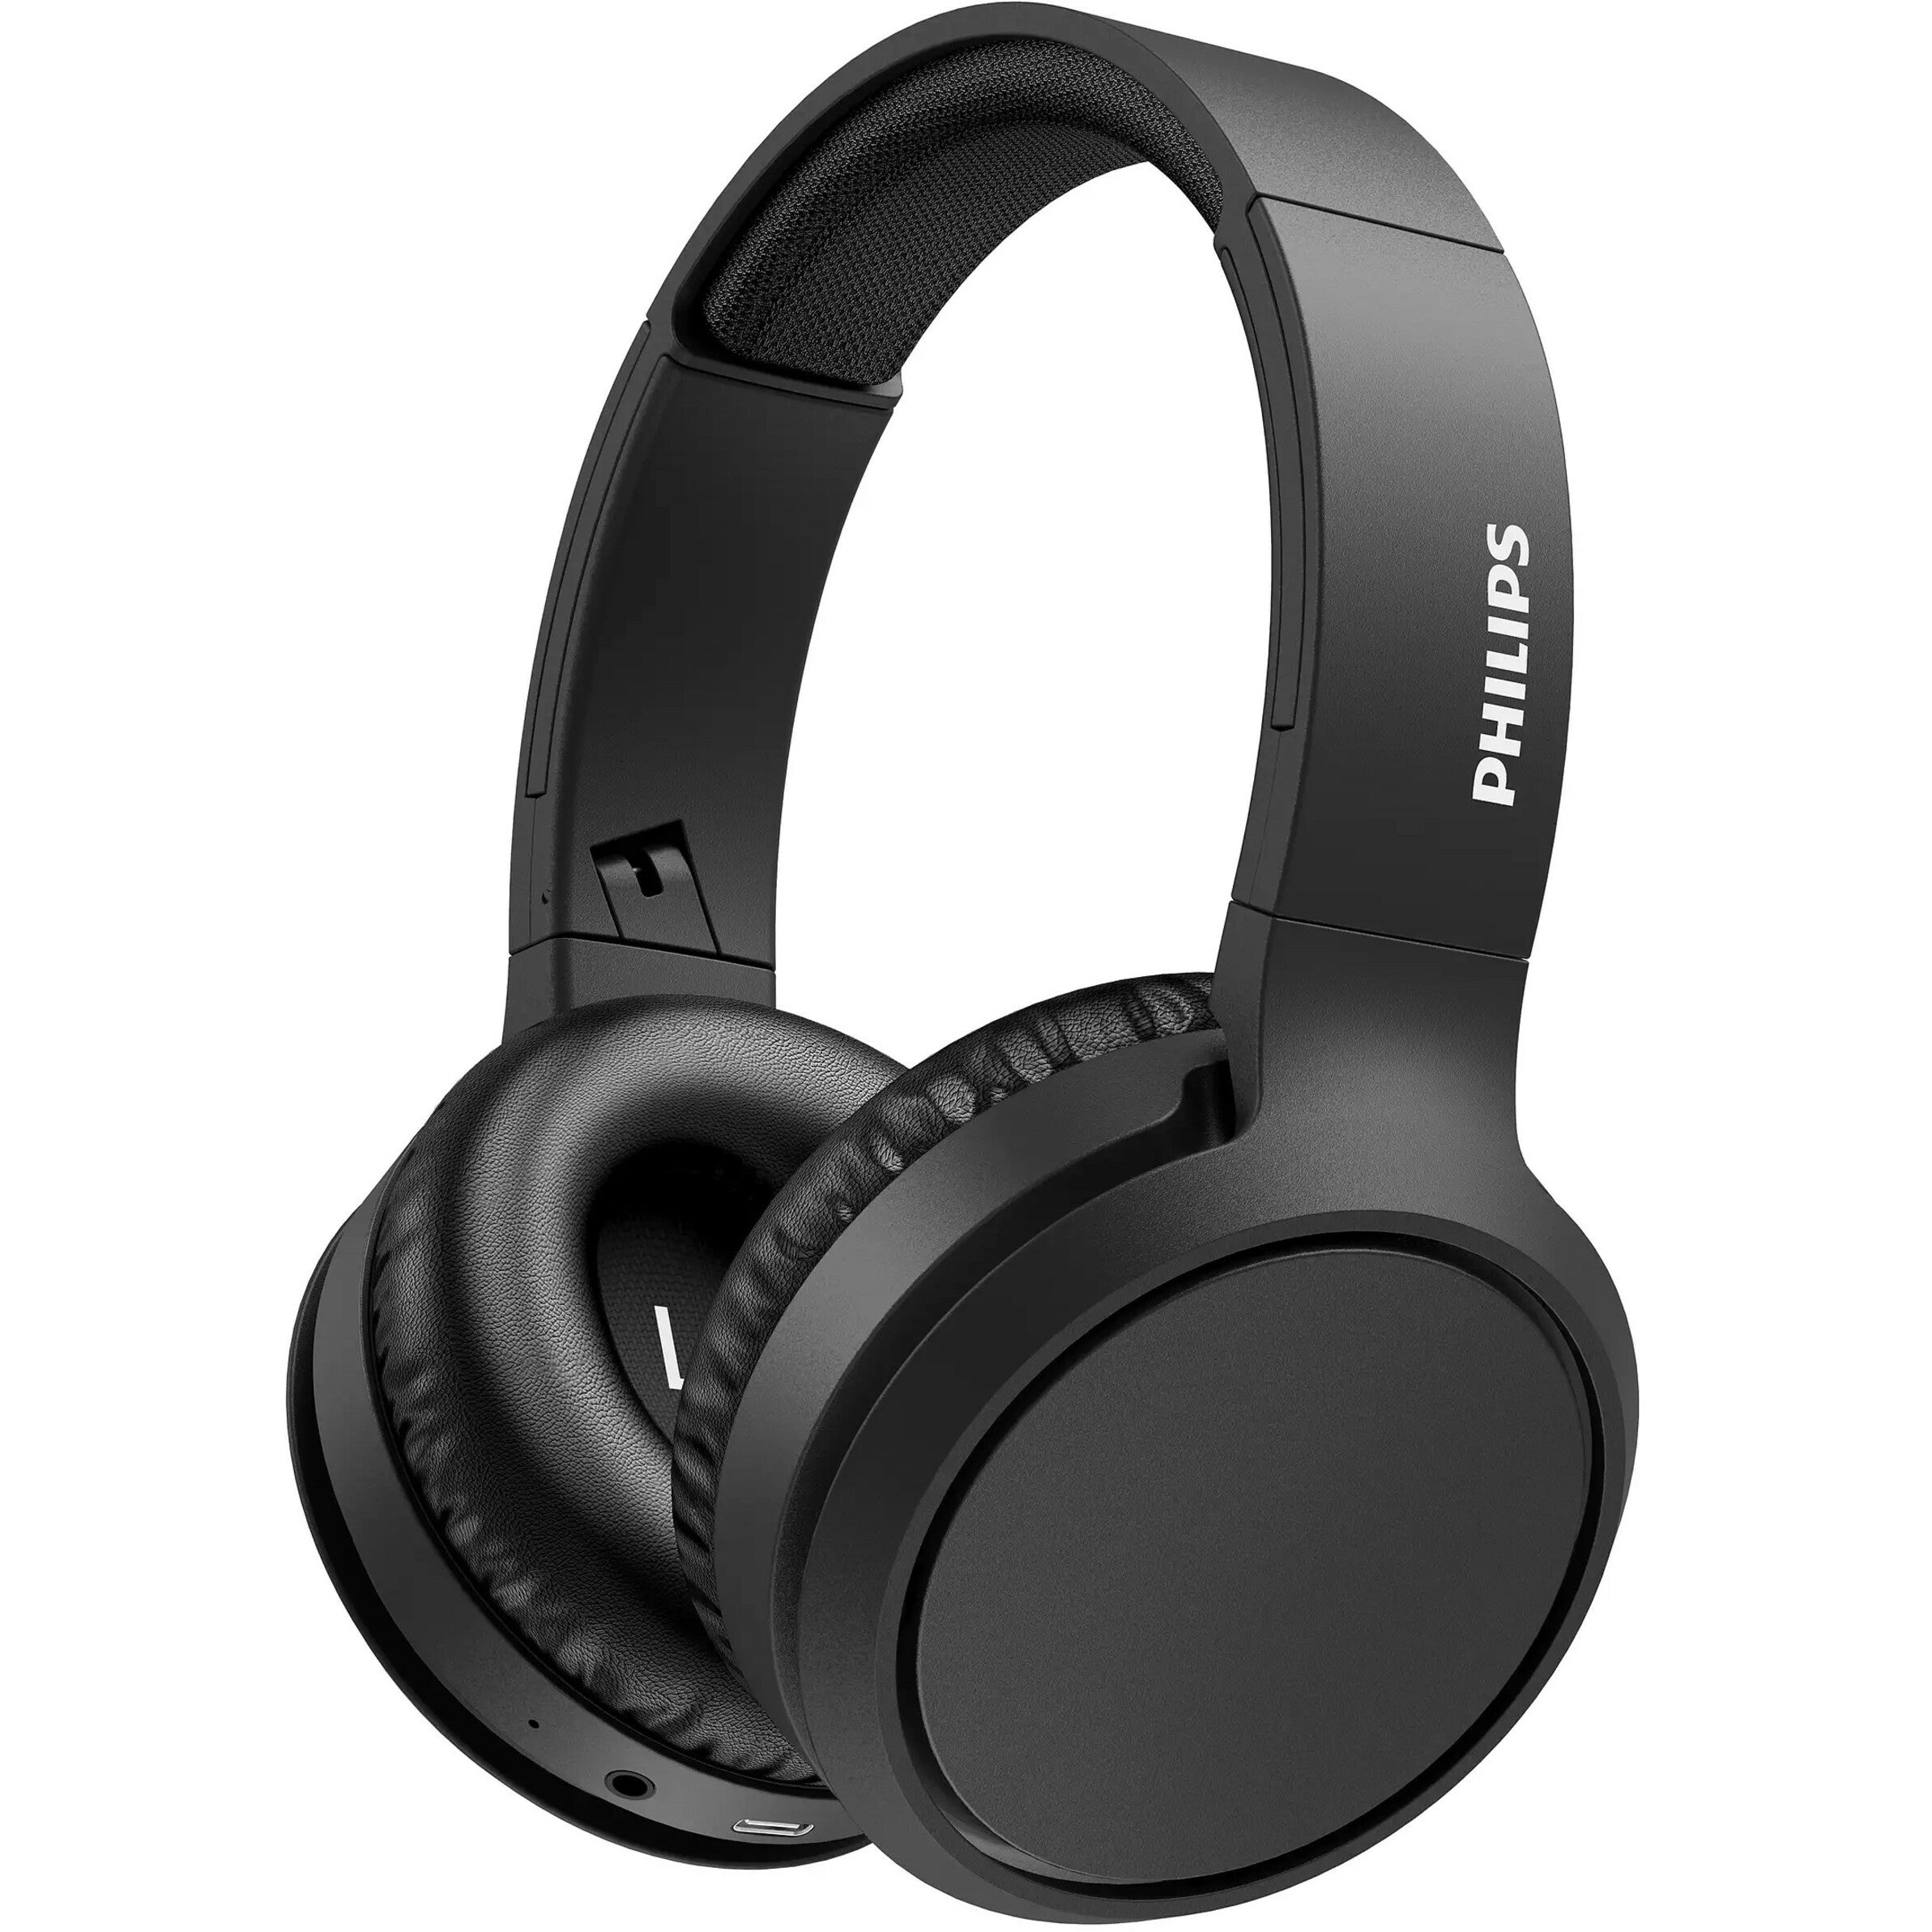 Philips TAH5205BK/00 Headset, Fold-Flat Lightweight Over-the-Ear Headphones with Integrated Microphone